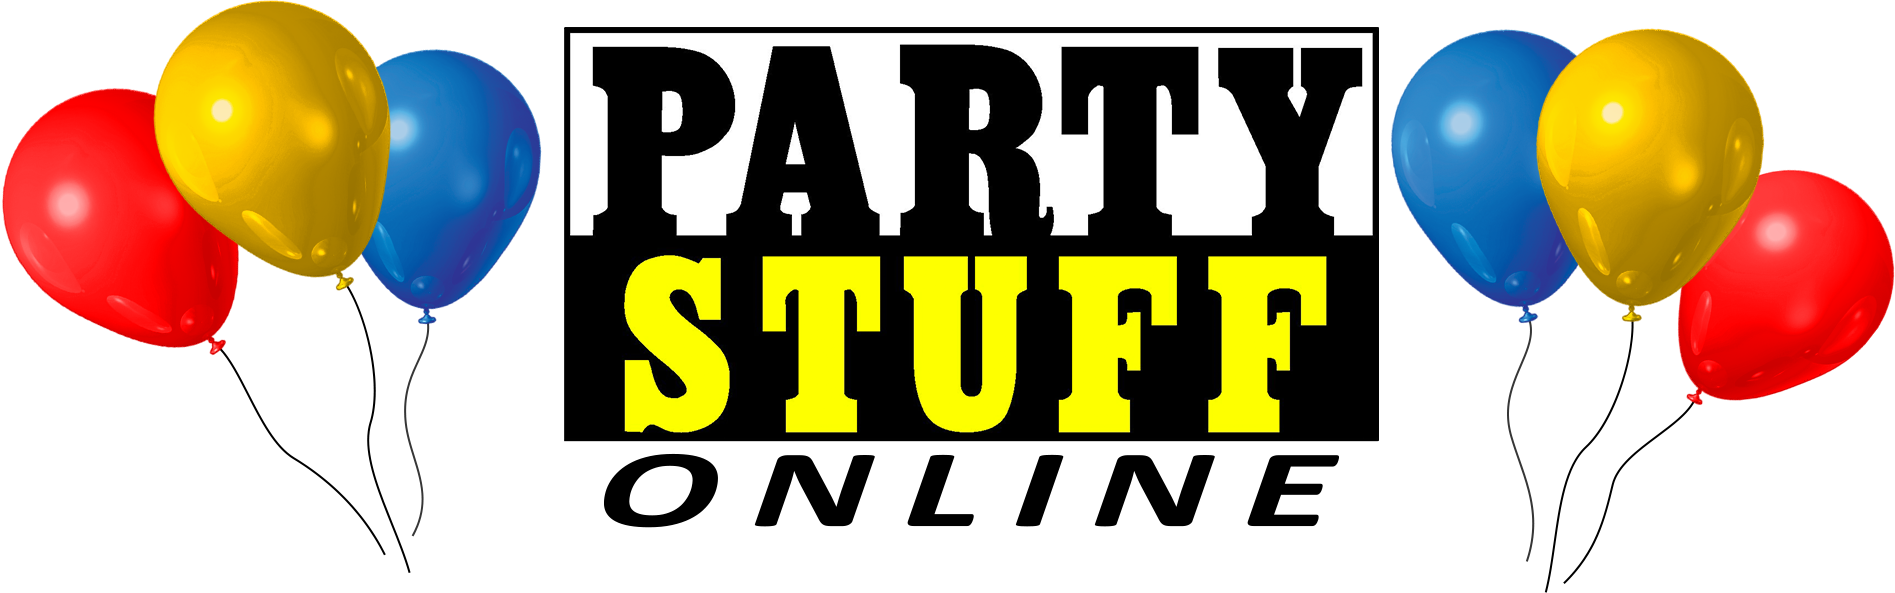 Home Party Stuff - roblox party supplies canada